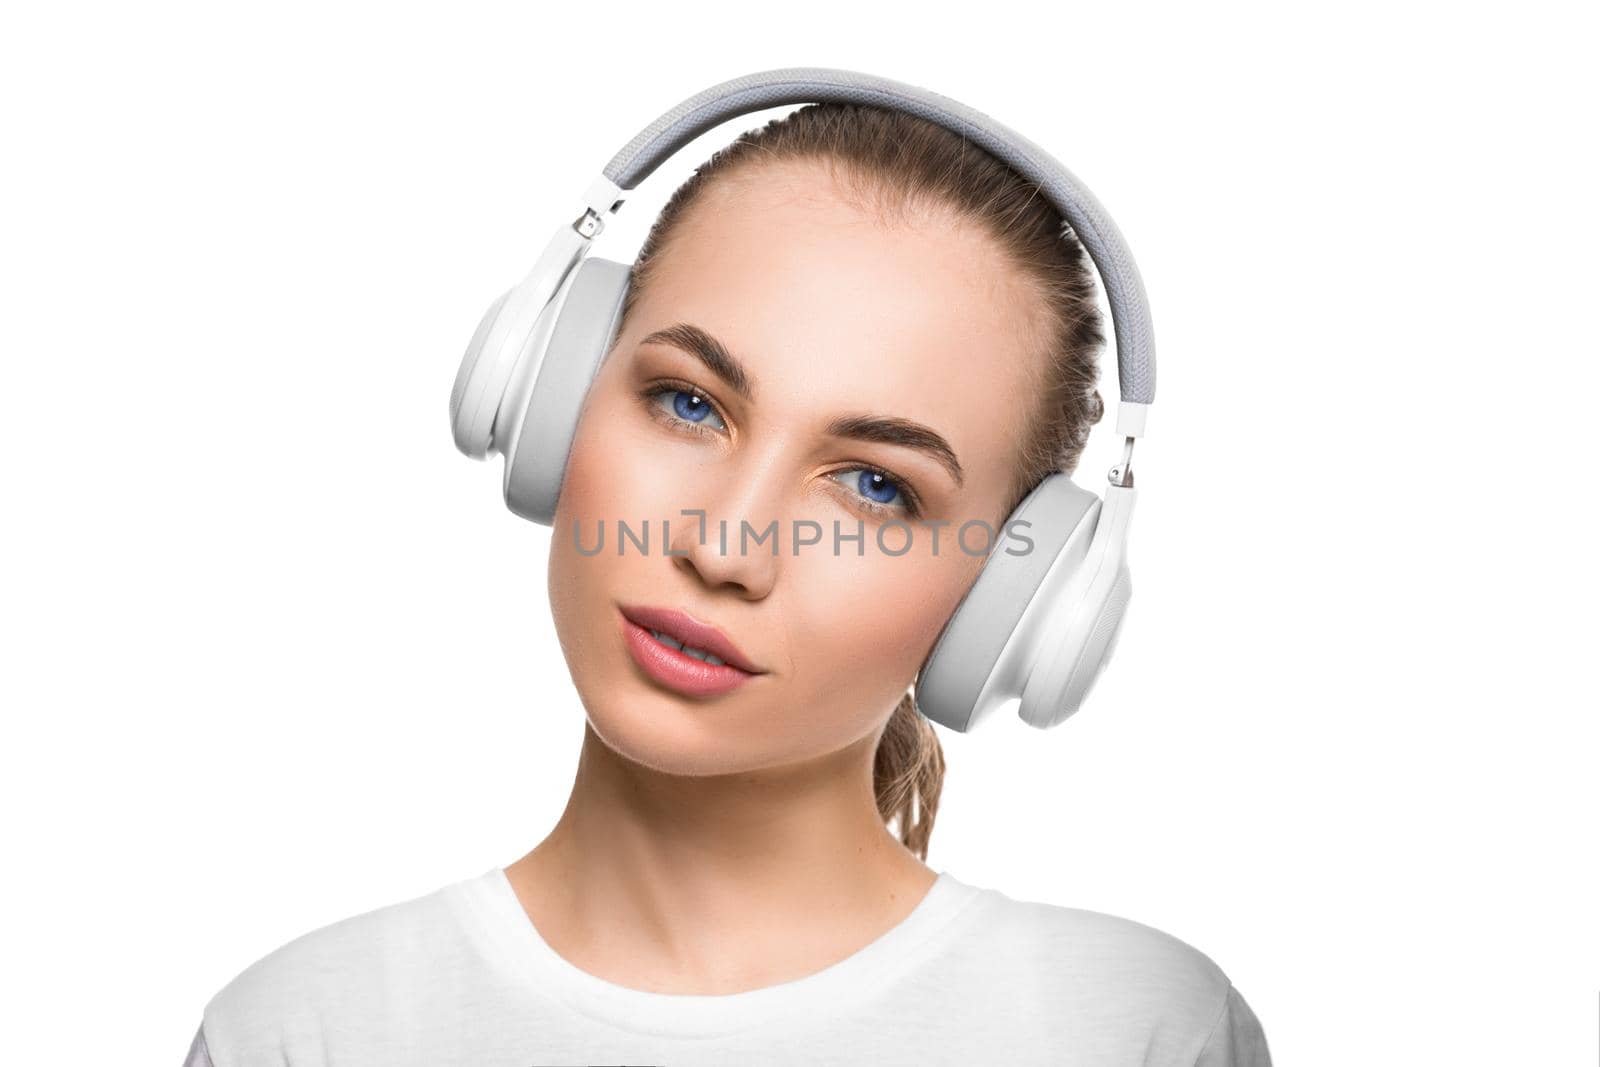 Blue eyed woman in headphones looking at camera. Close up portrait. Isolated on white background.